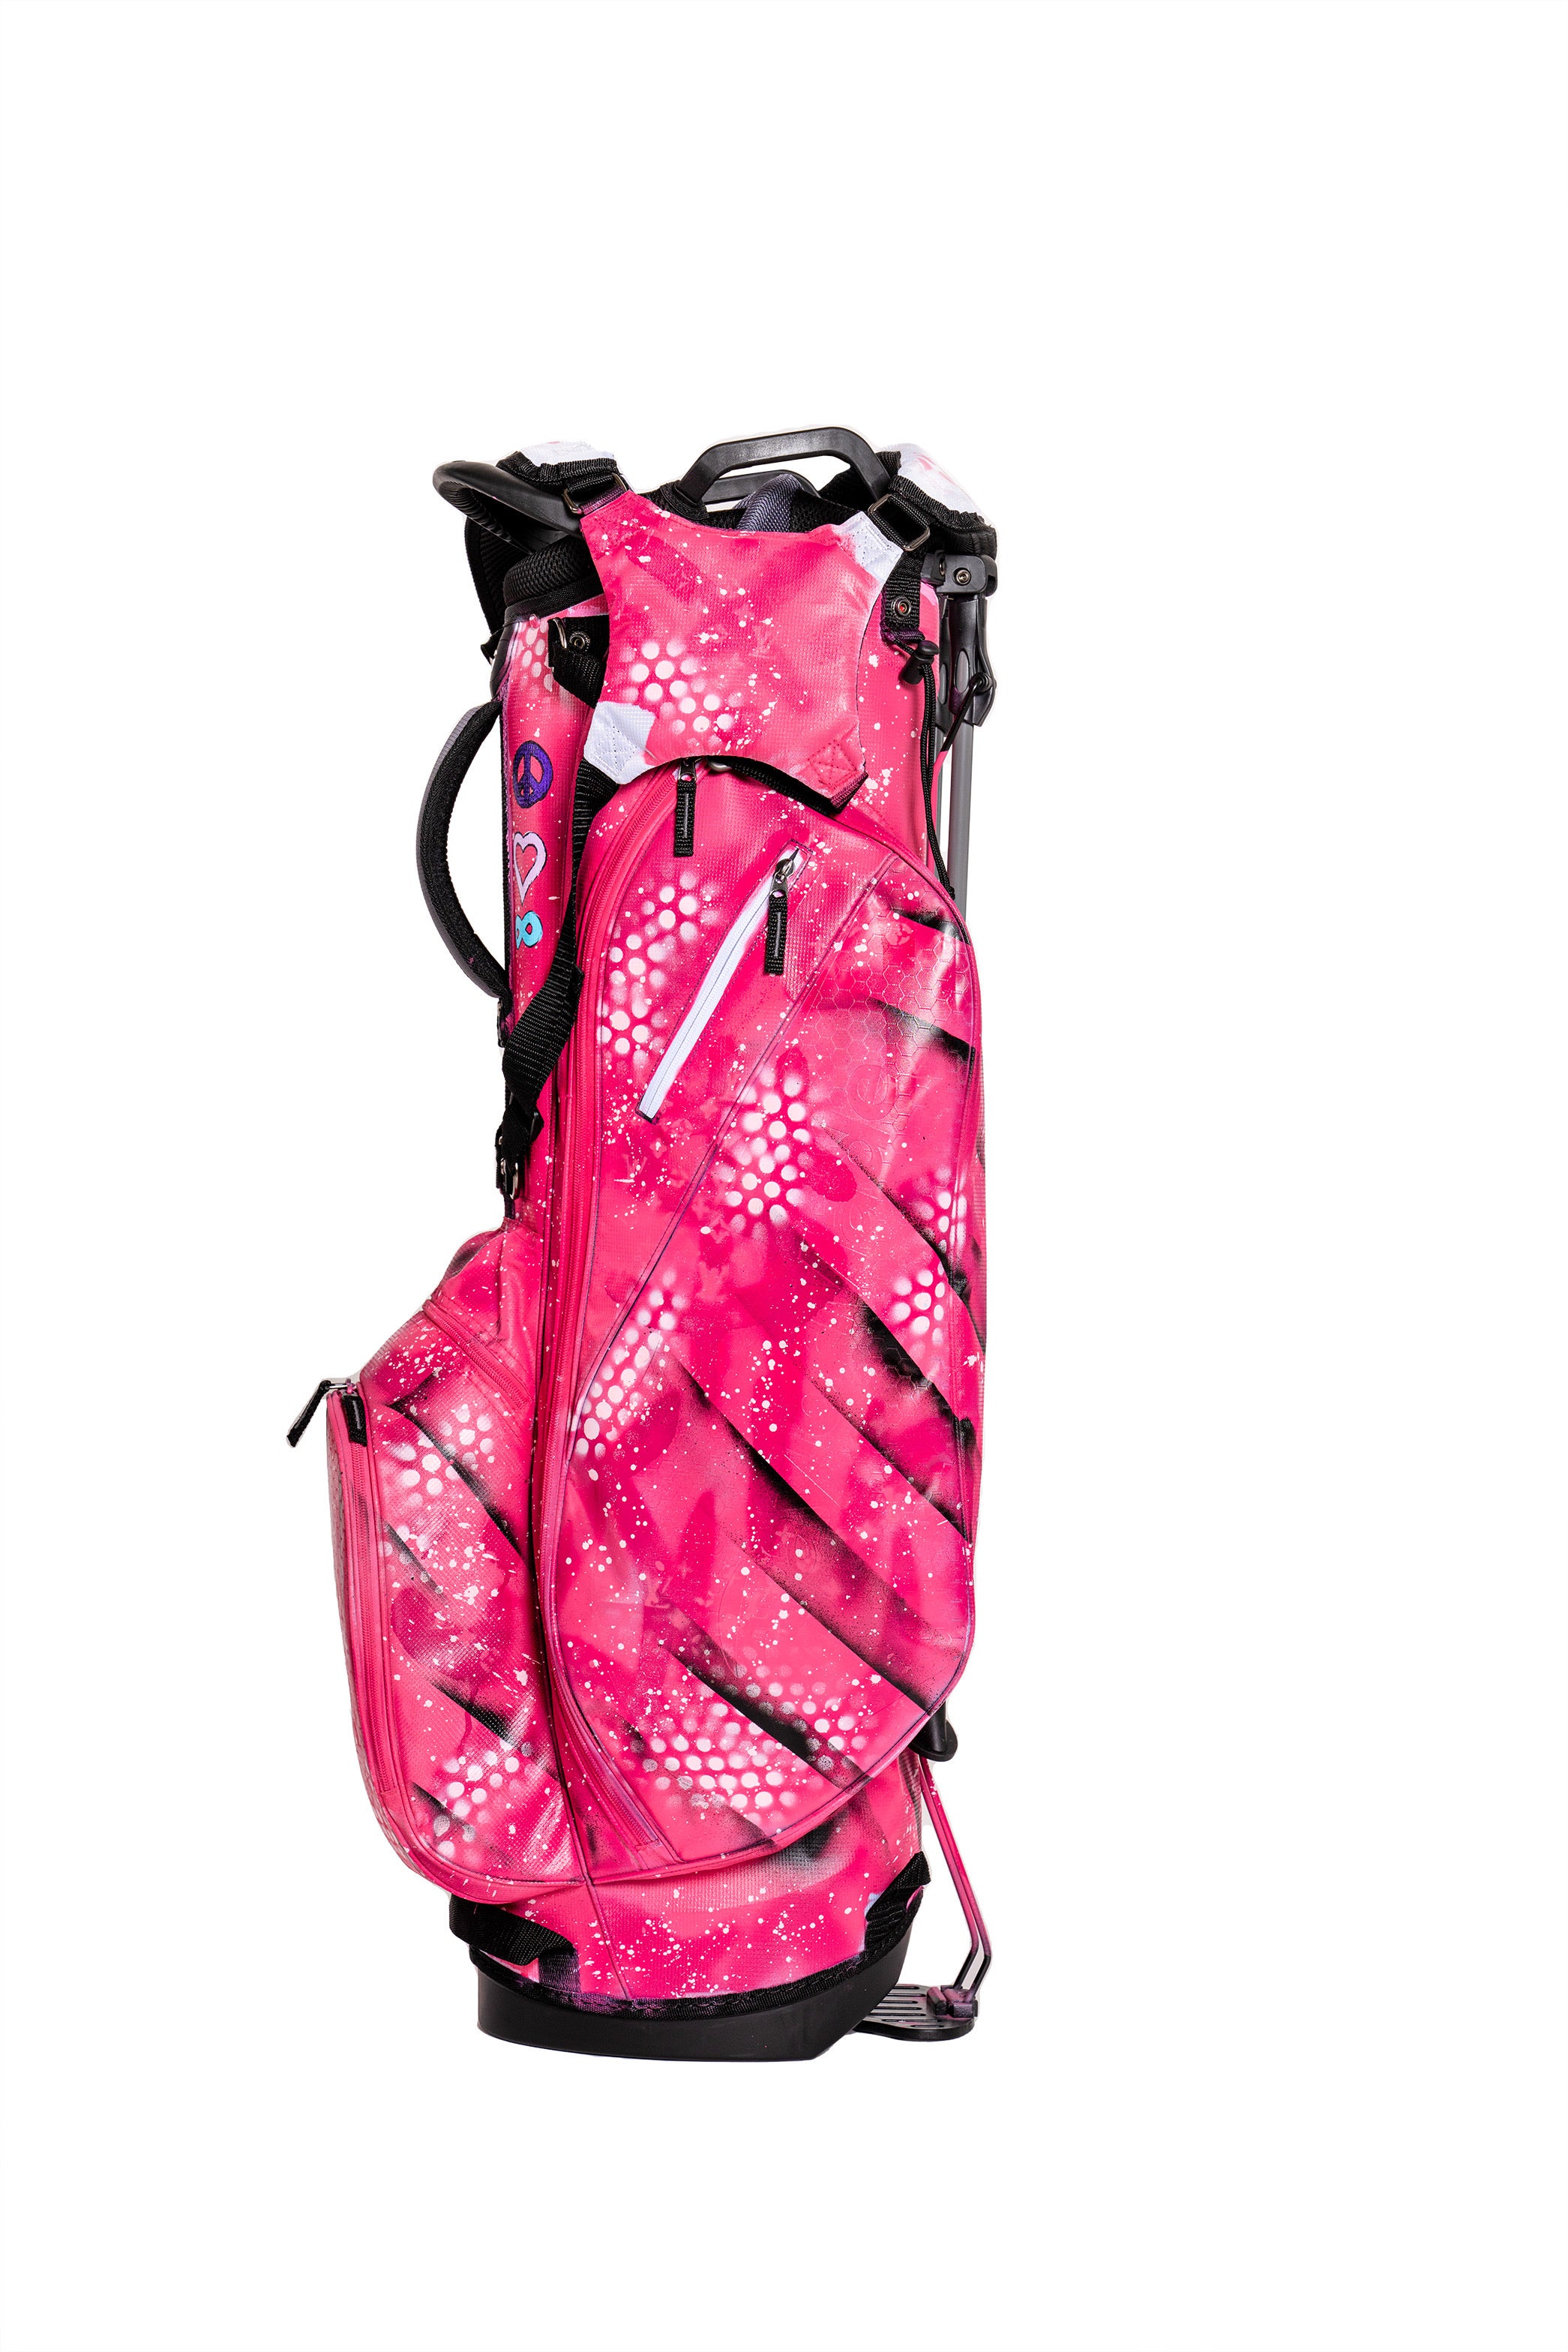 Show off your Golf Bag In the market for a new bag and looking for  inspiration  rgolf